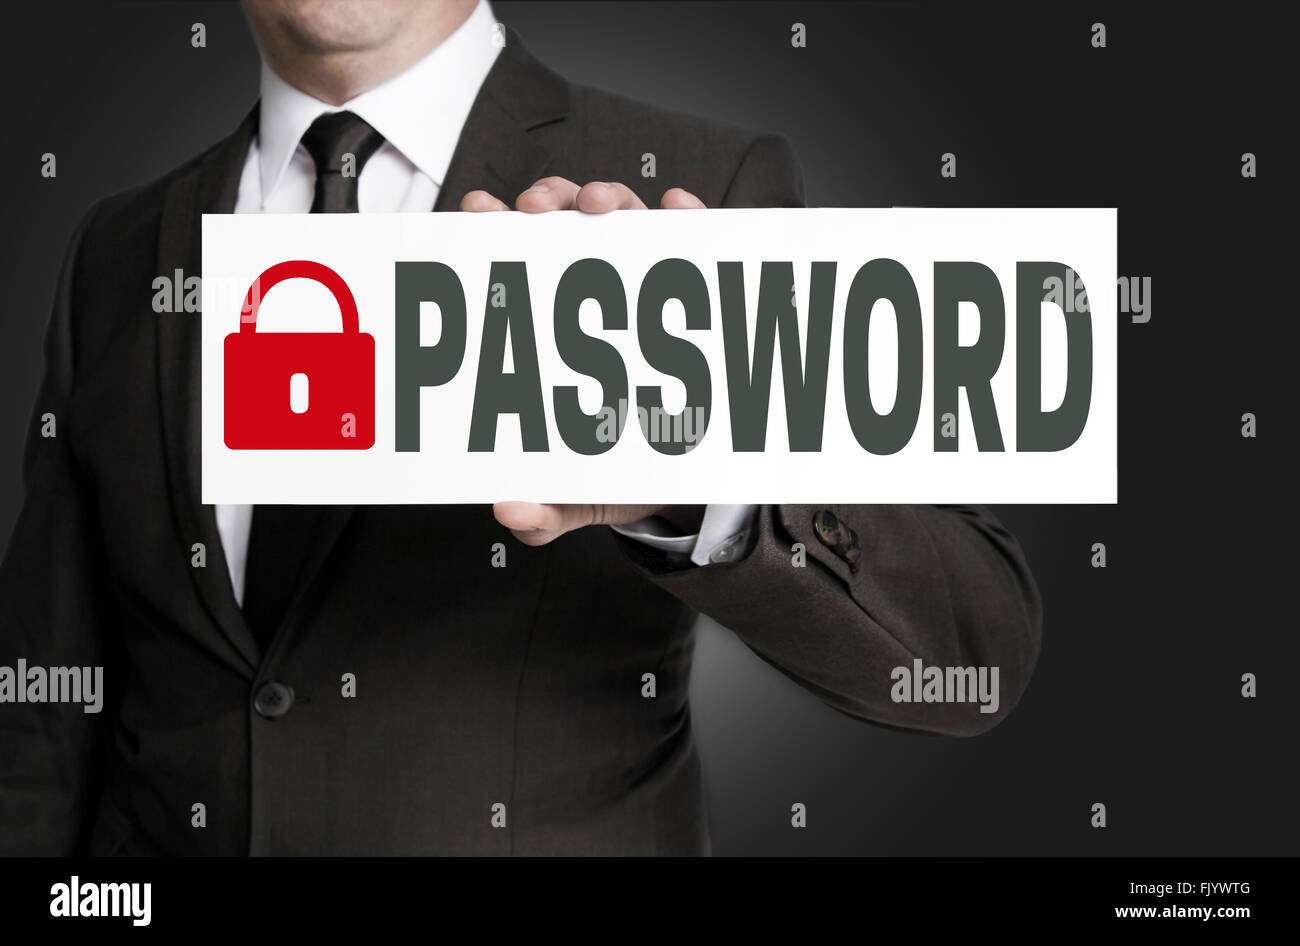 password placard is held by businessman. Stock Photo